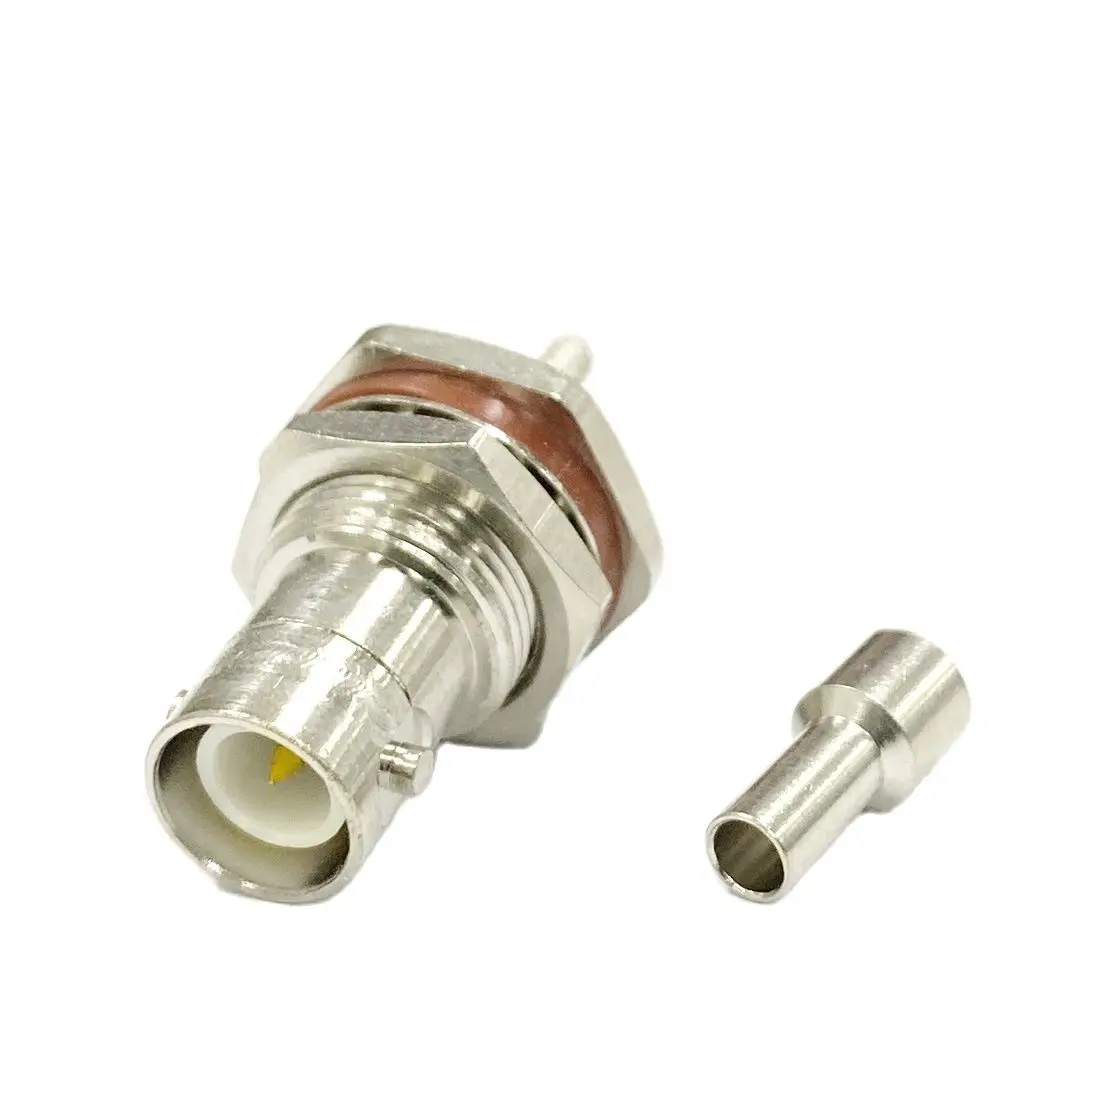 

1pc RP-BNC Female Jack Nut Inner Pin RF Coax Connector Crimp for RG316 RG174 Cable Straight Nickelplated New Wholesale